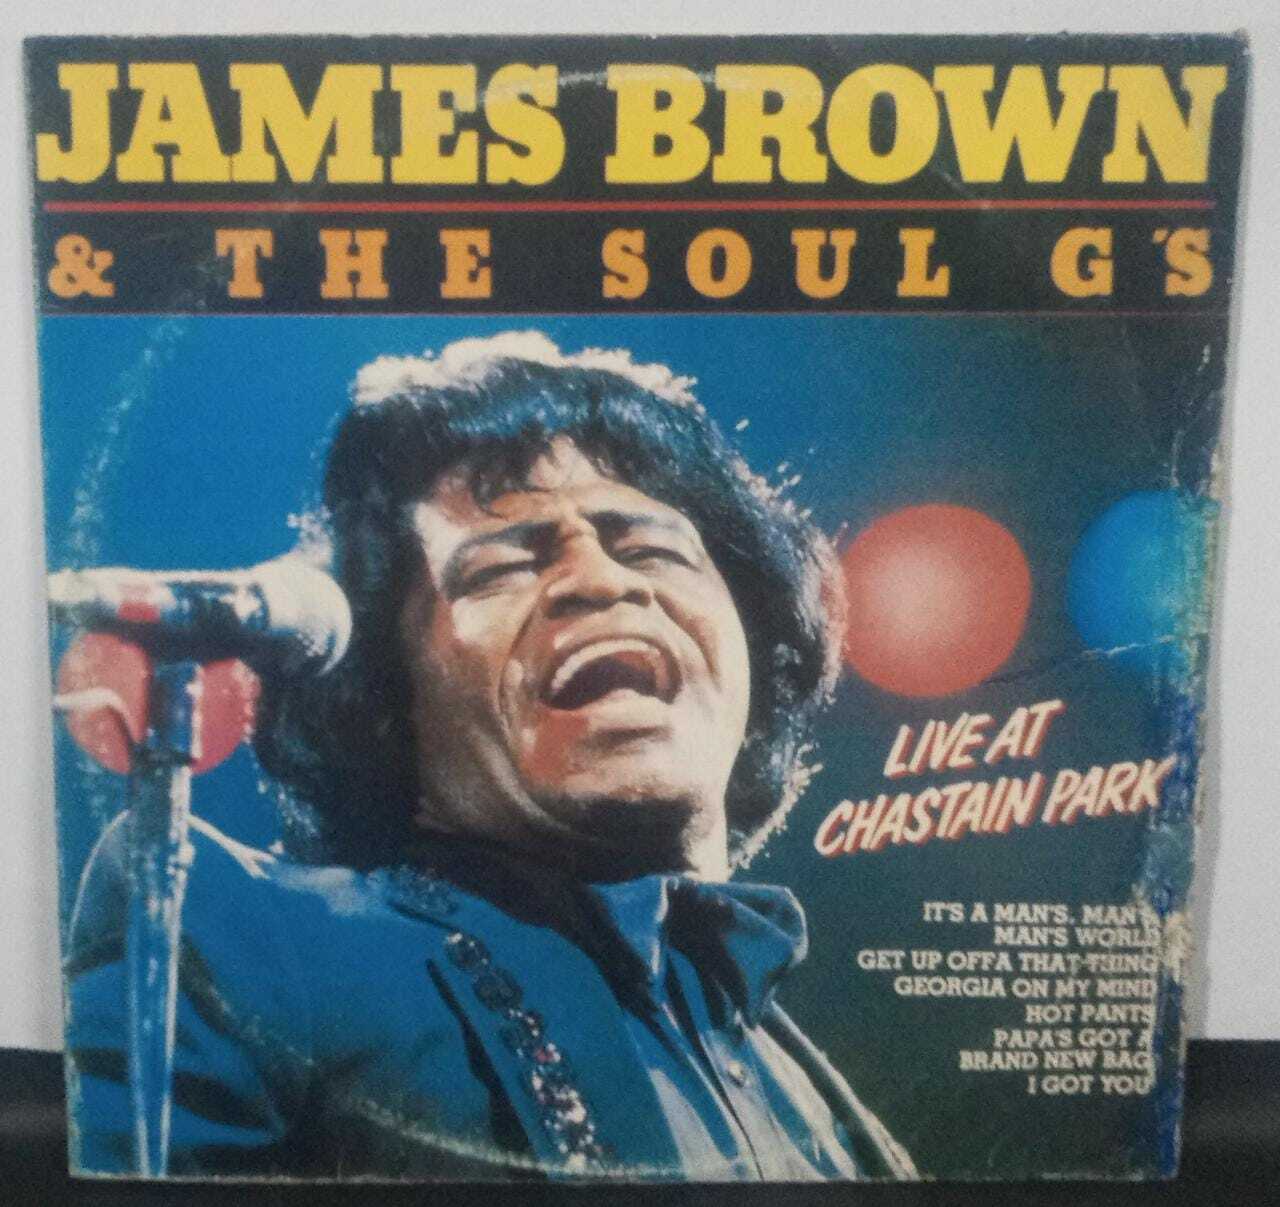 Vinil - James Brown & The Soul Gs - Live At Chastain Park